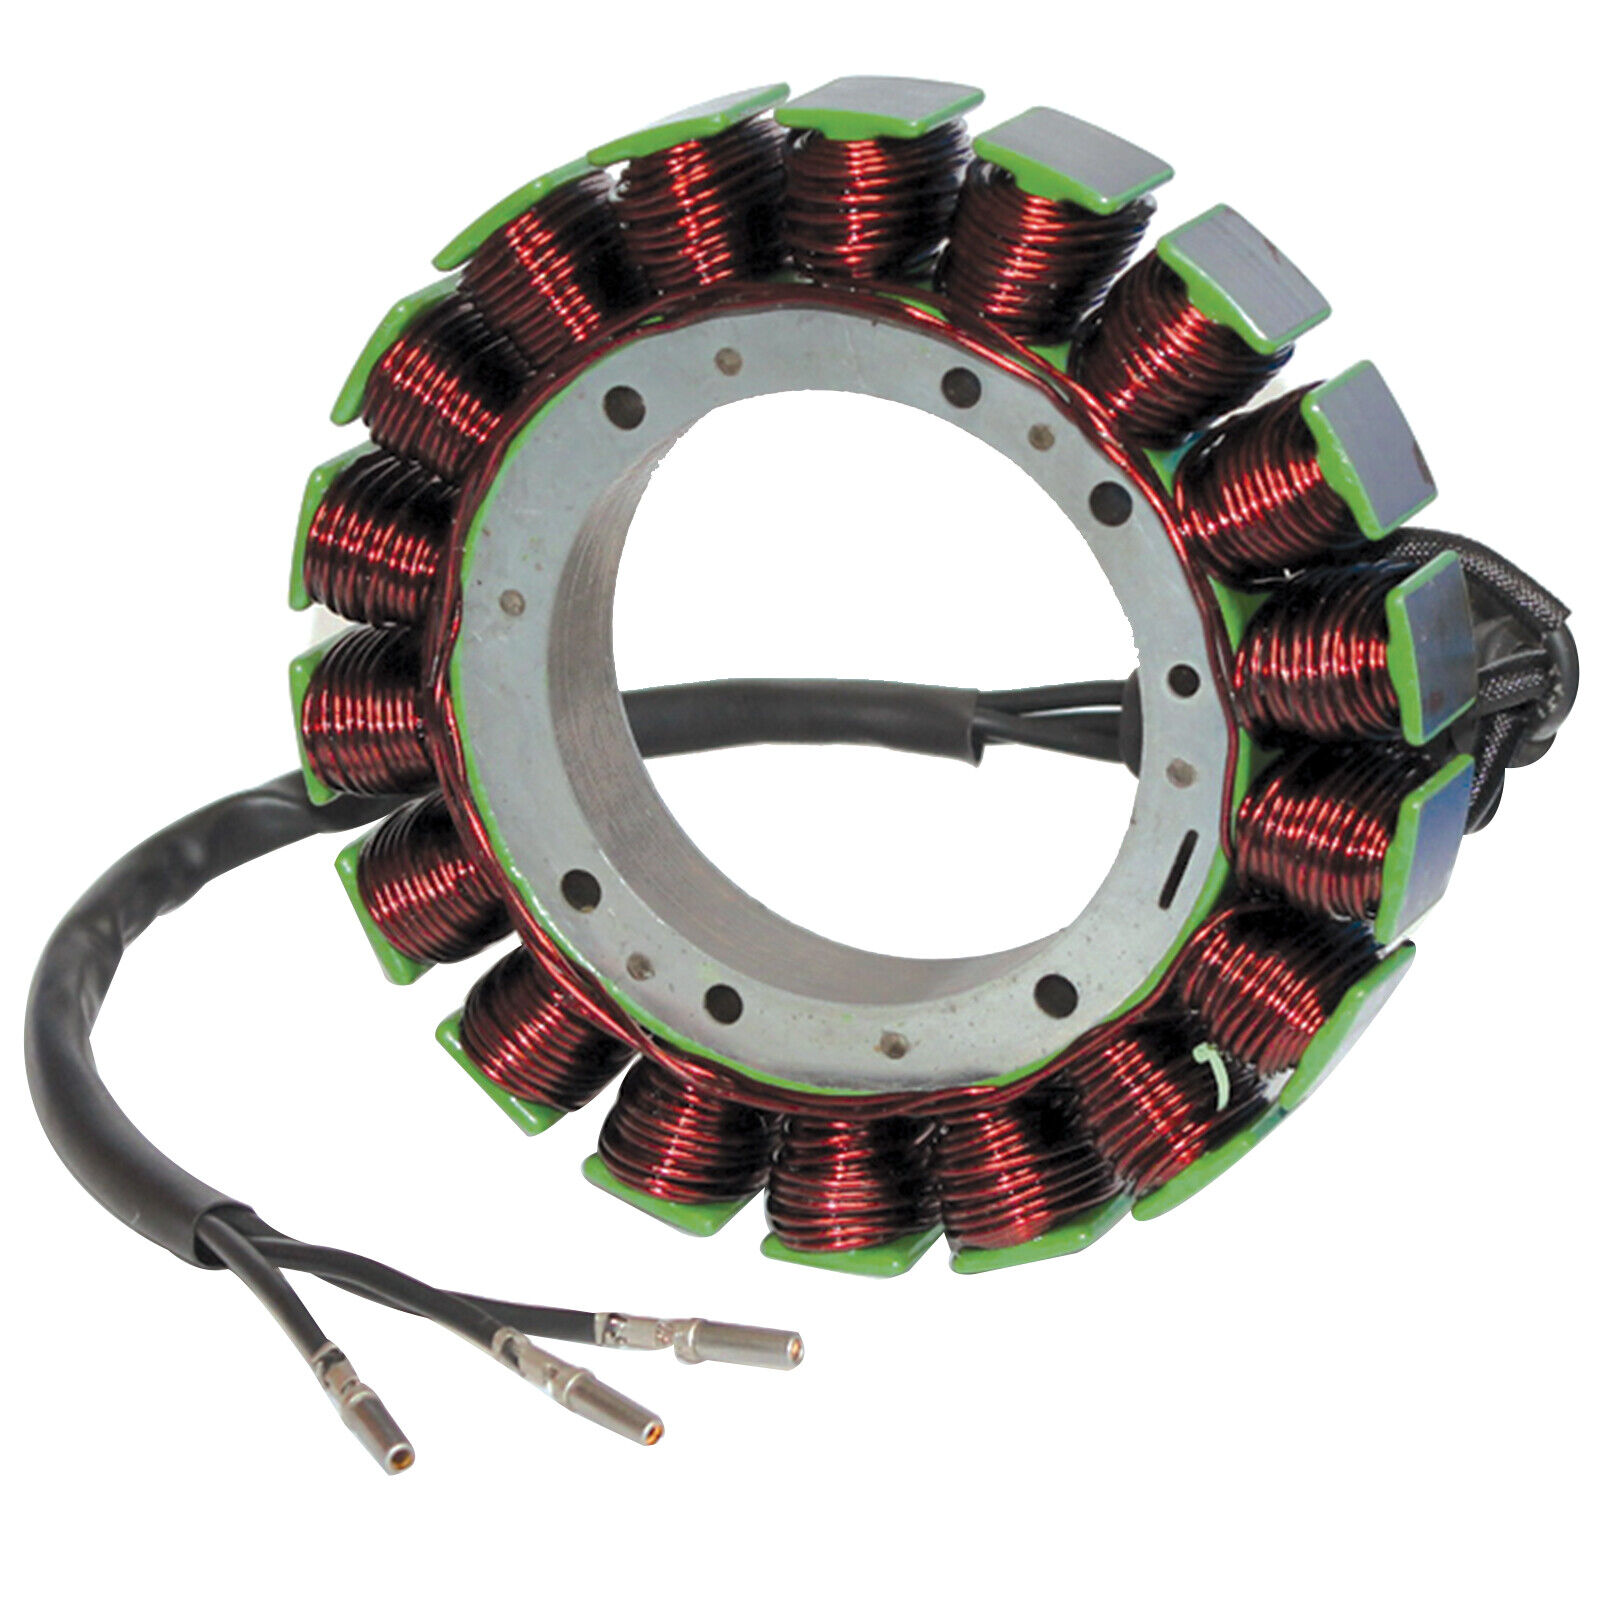 A surprise price is realized Stator for Harley Davidson 30017-01A 30017-01B Alternat 30017-01 Quantity limited